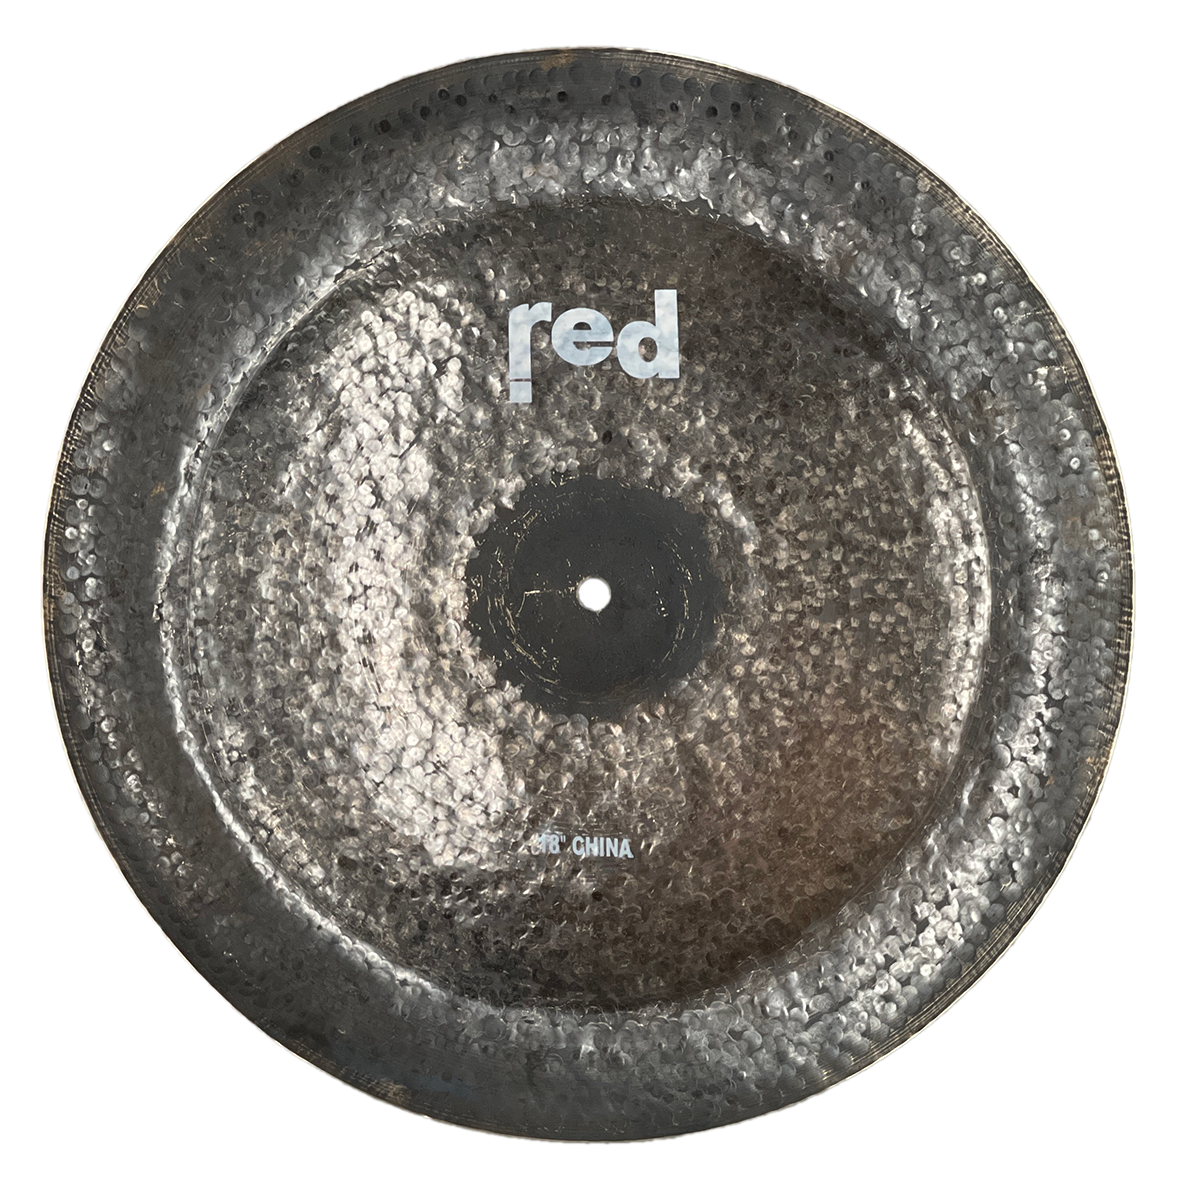 Red Cymbals Maestro Series China Cymbal